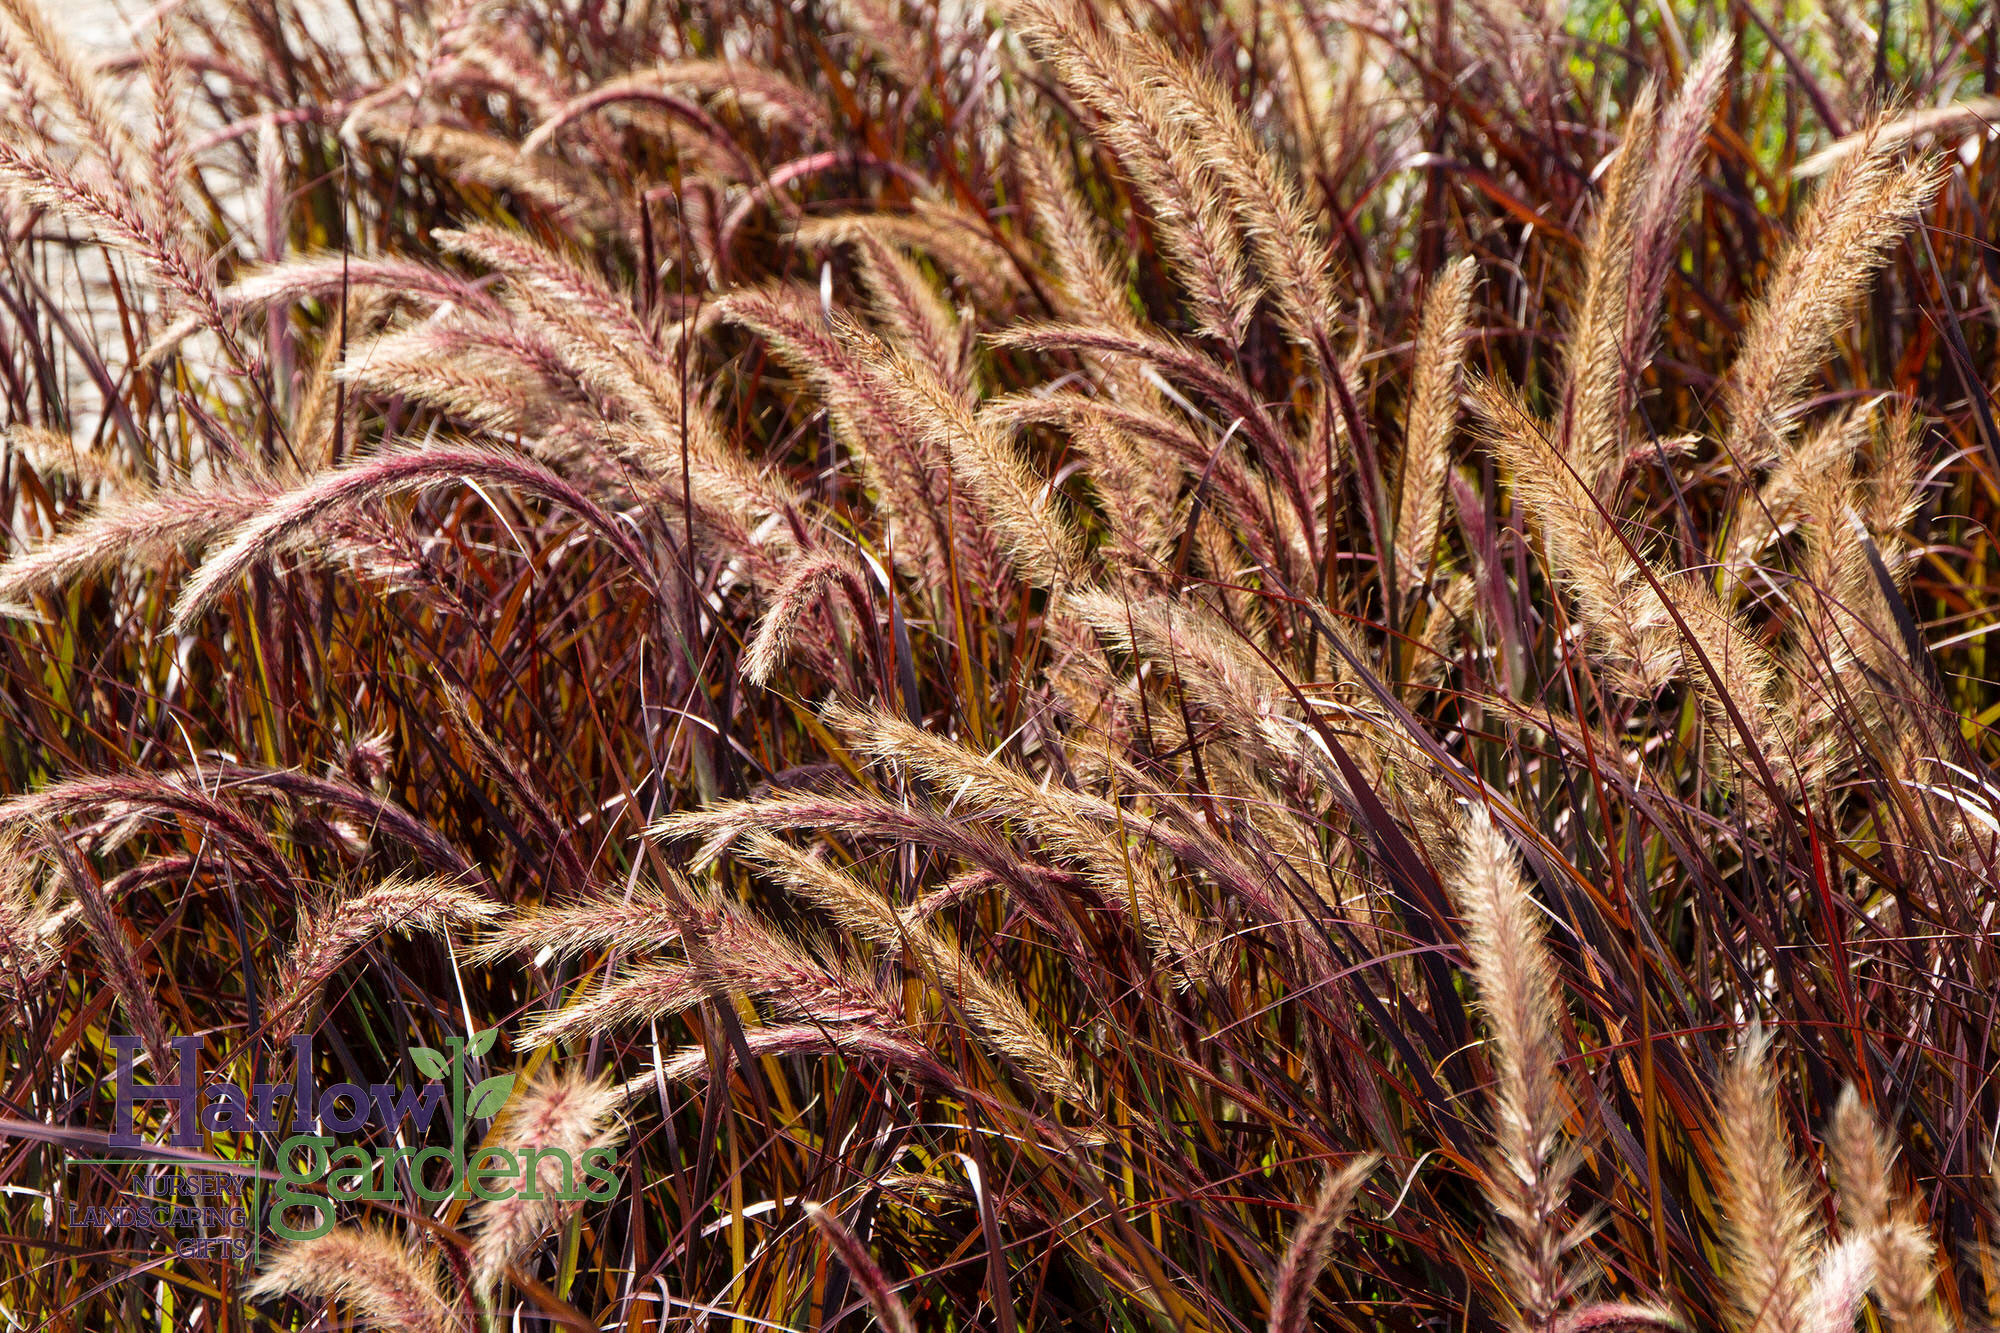 Purple Fountain Grass for sale at Harlow Gardens Tucson.